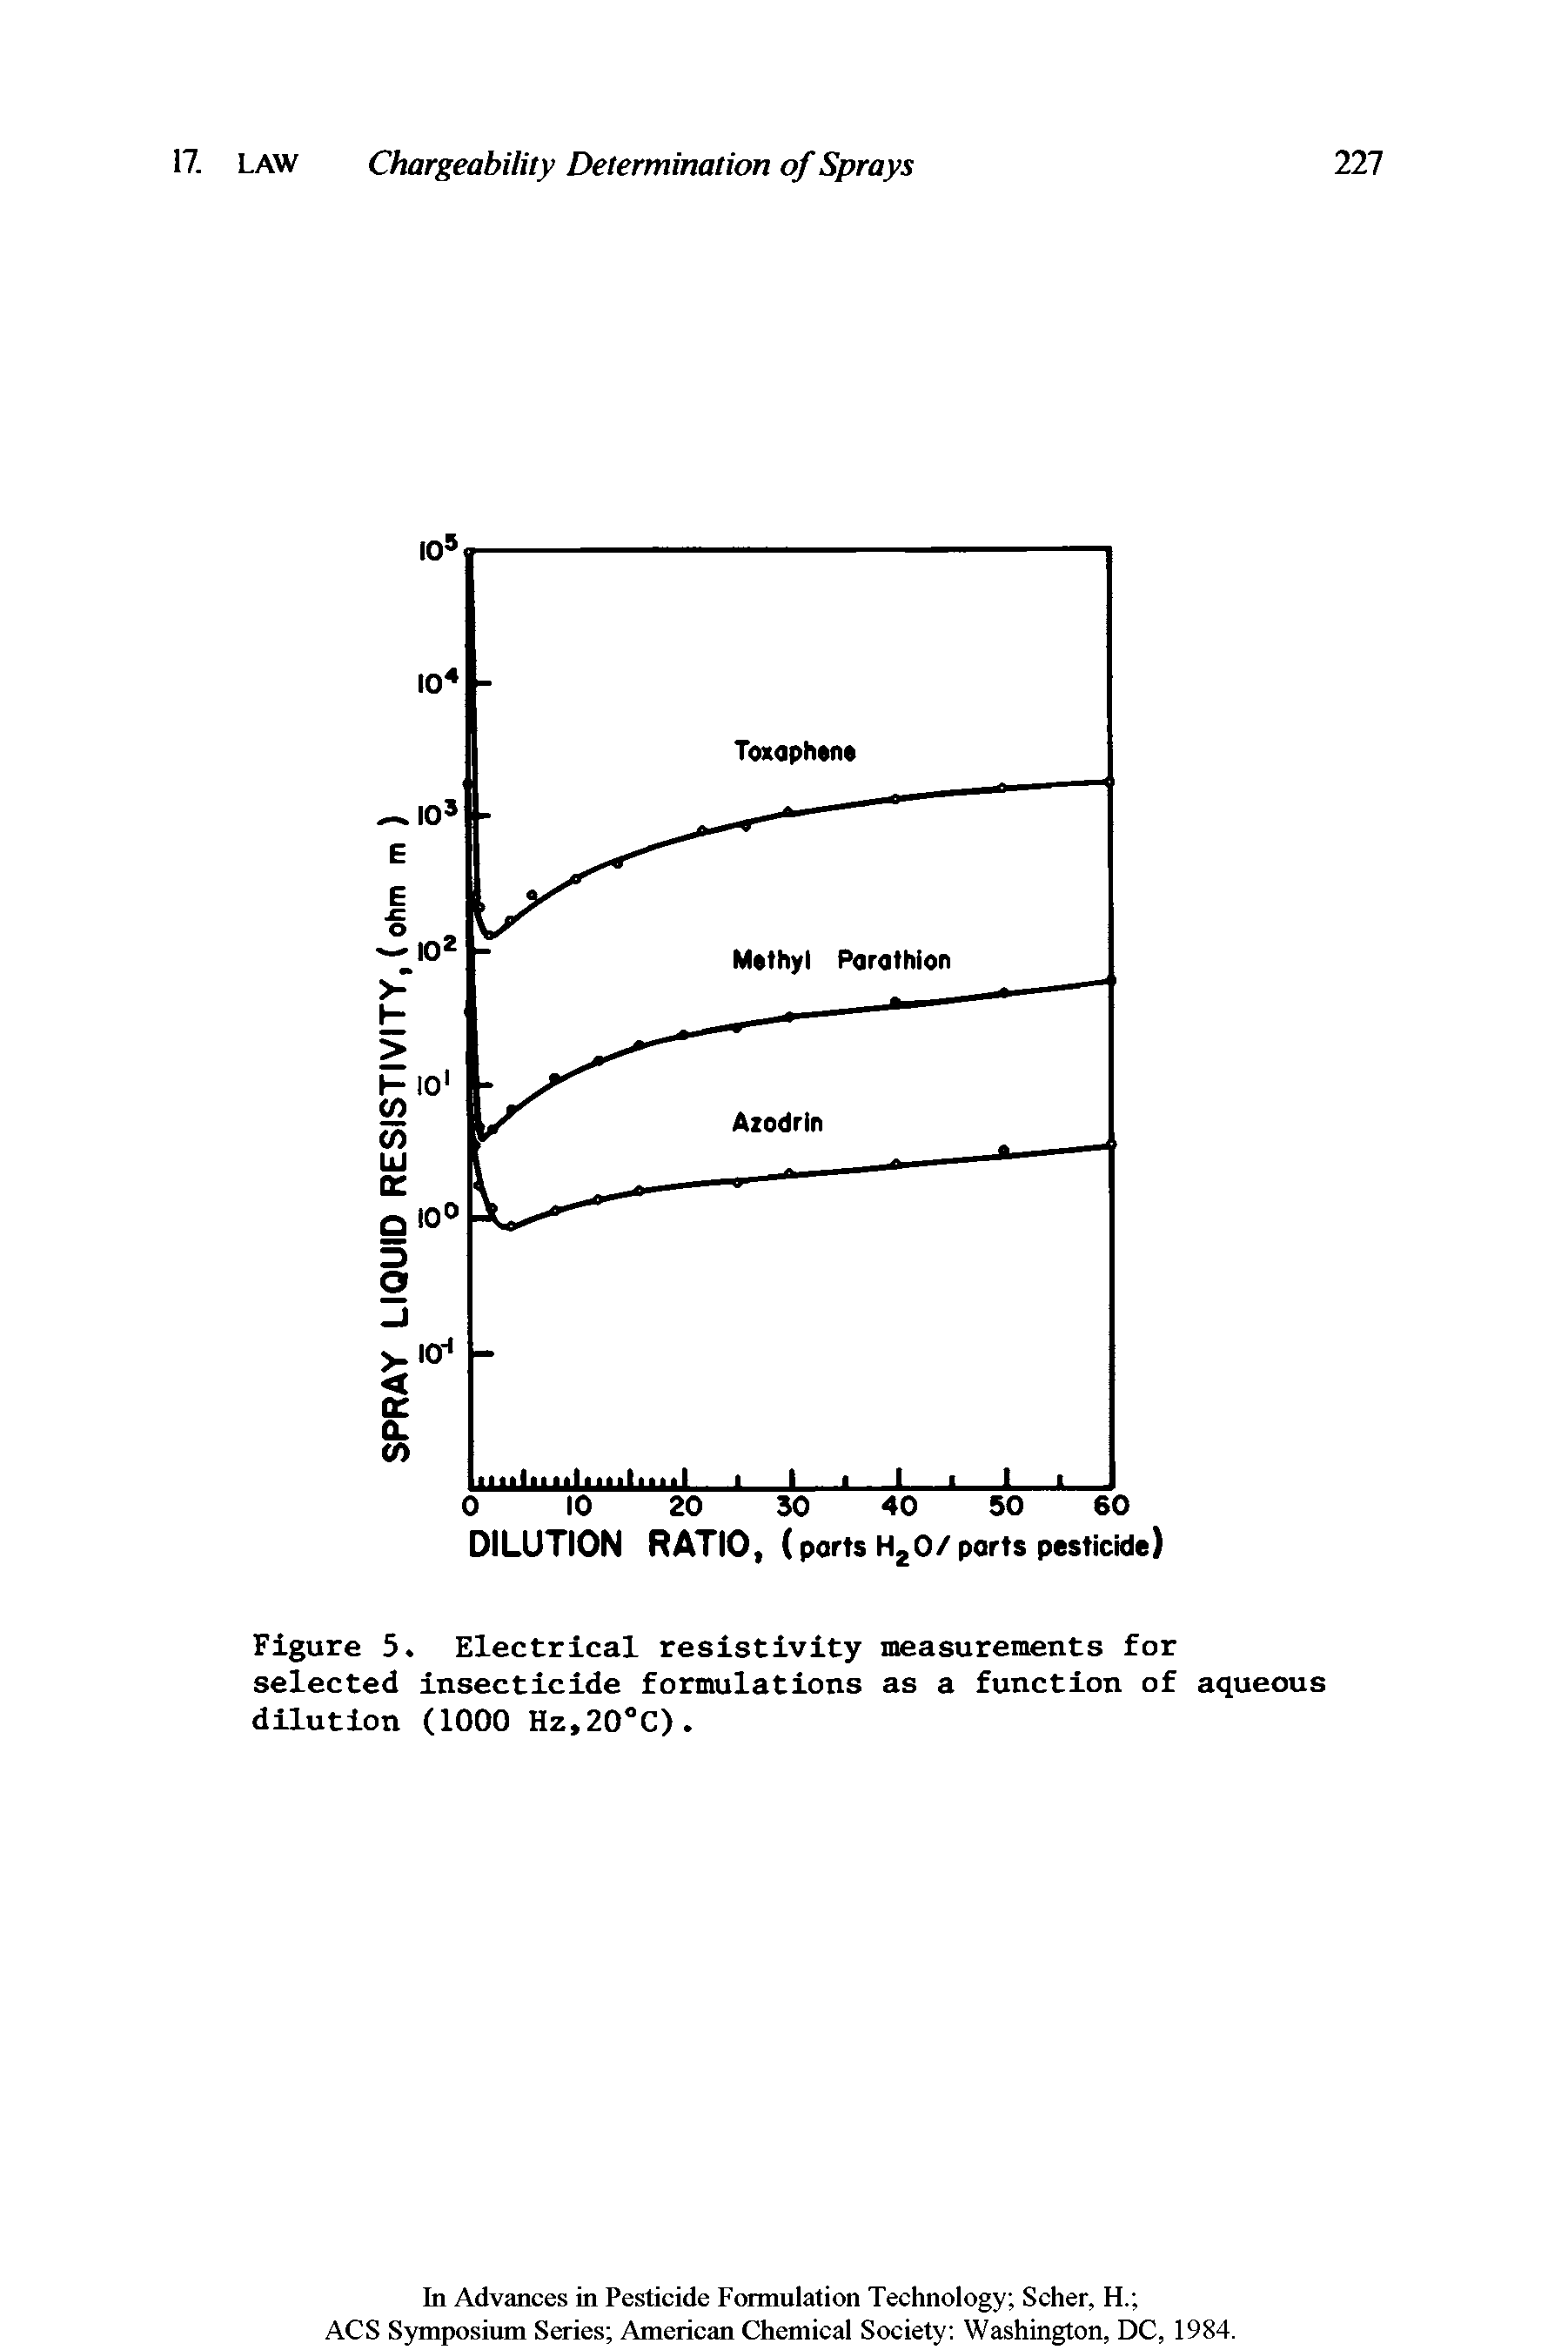 Figure 5. Electrical resistivity measurements for selected insecticide formulations as a function of aqueous dilution (1000 Hz,20 C).